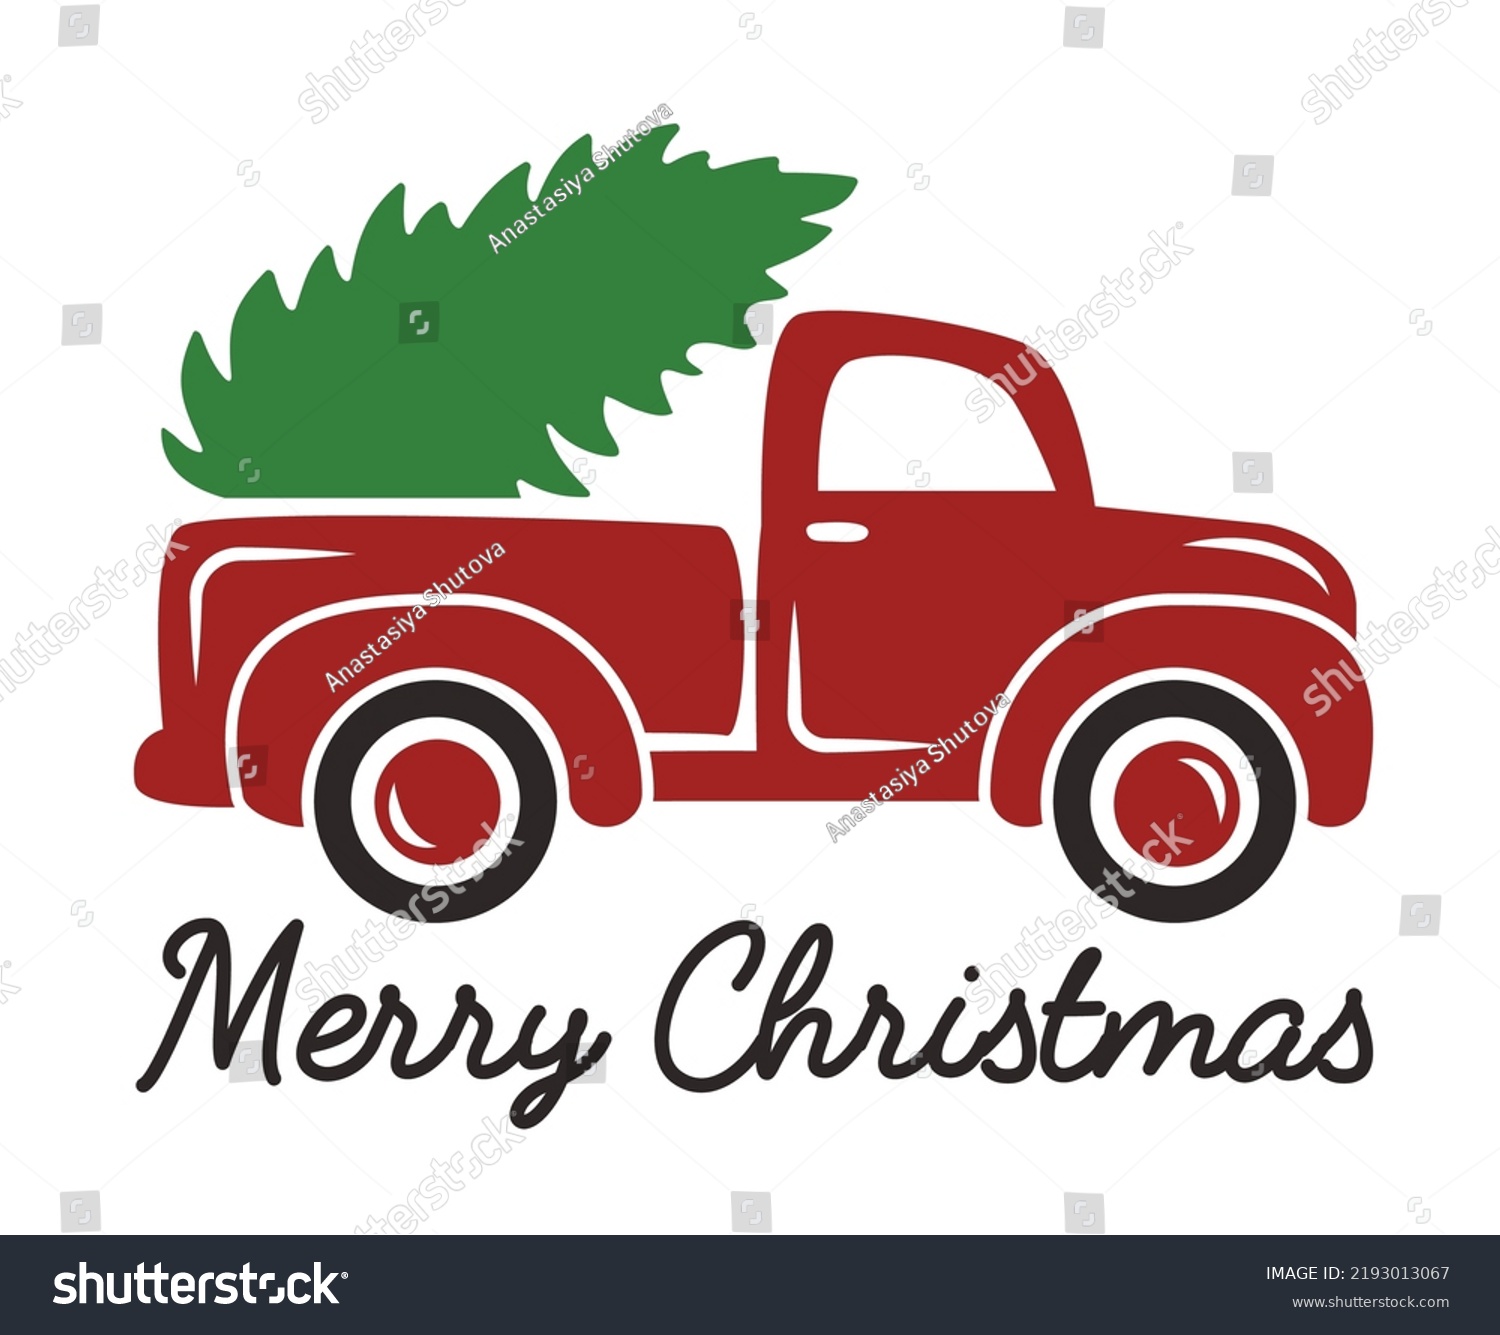 SVG of Christmas tree truck Svg cut file. Red old vintage truck carrying pine tree vector illustration isolated on white background. Merry Christmas shirt design svg